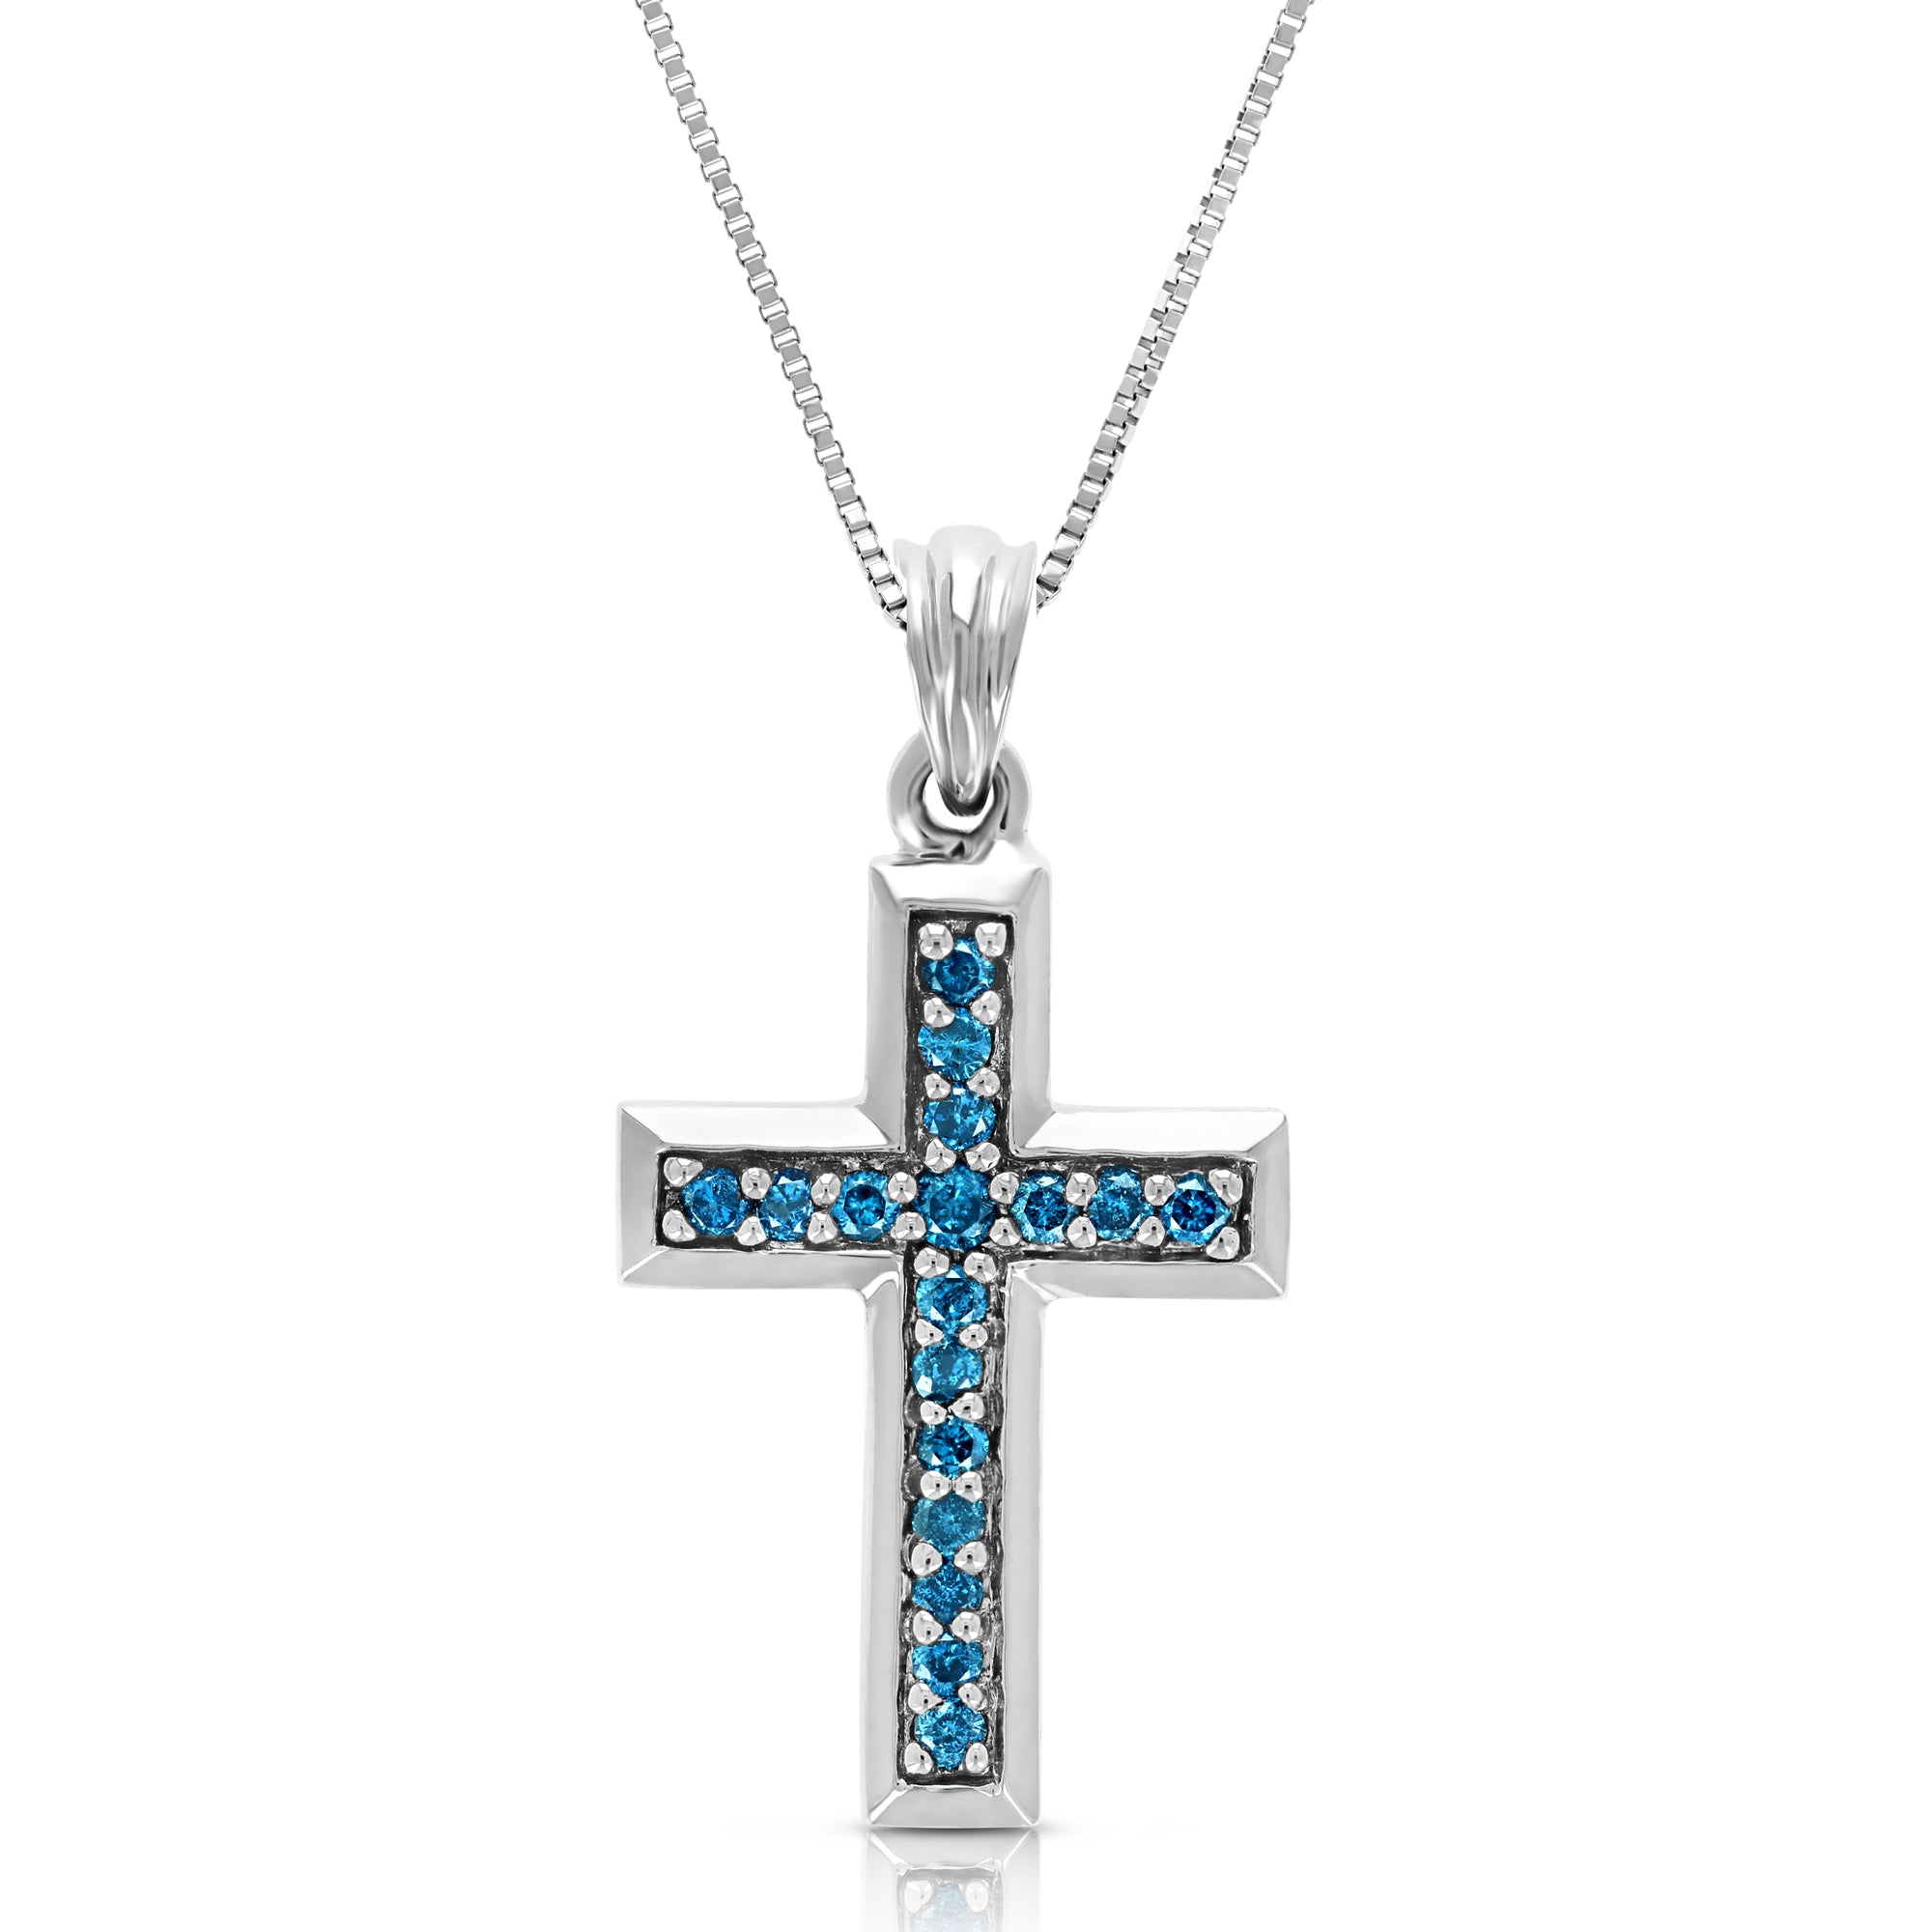 1/4 cttw Blue Diamond Cross Pendant Necklace 14K White Gold with 18 Inch Chain